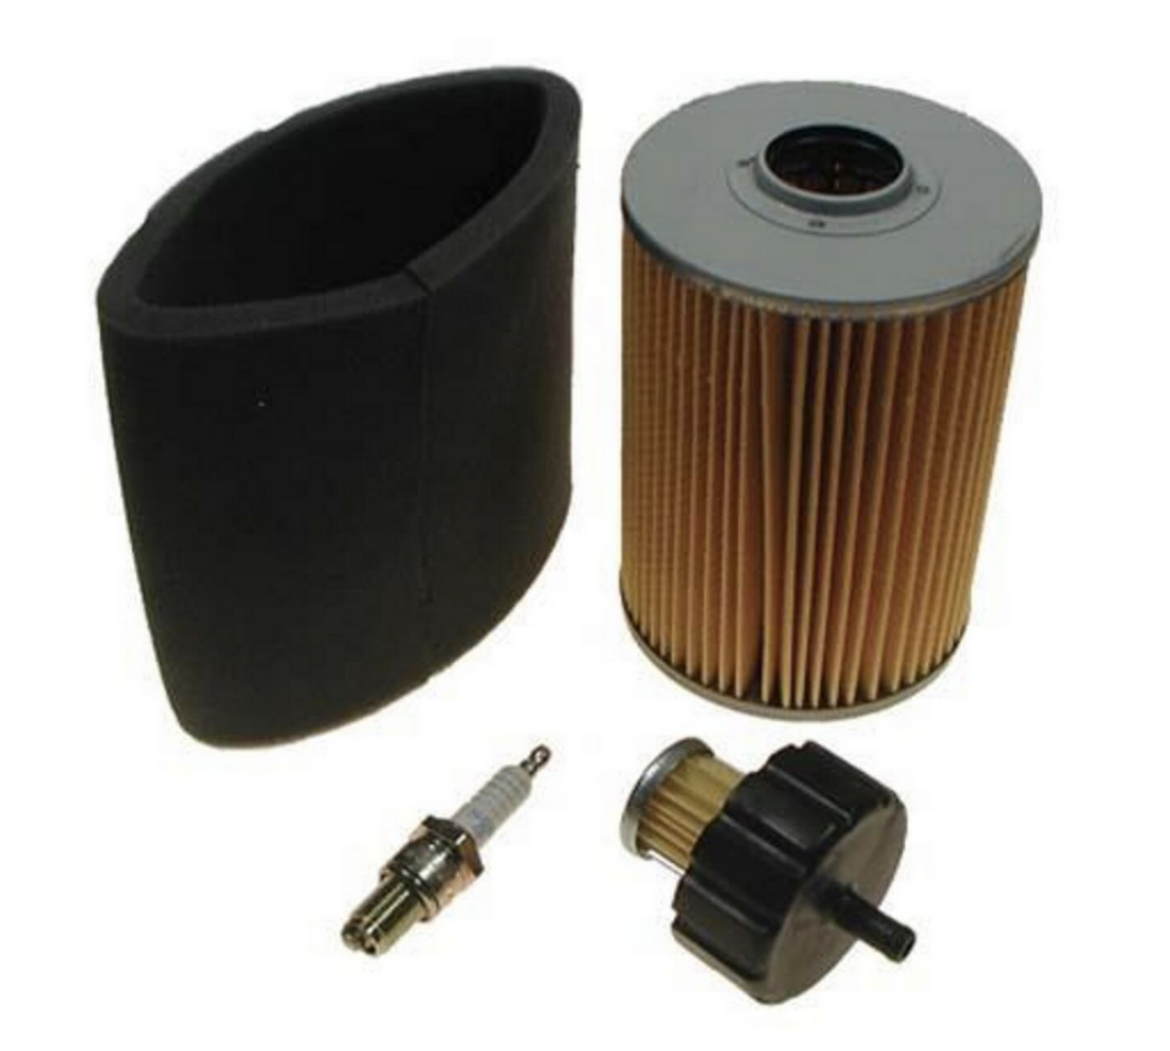 Picture of YAMAHA TUNE UP KIT - G2 SPARK PLUG, FUEL, AIR, PRE FILTER (2136)